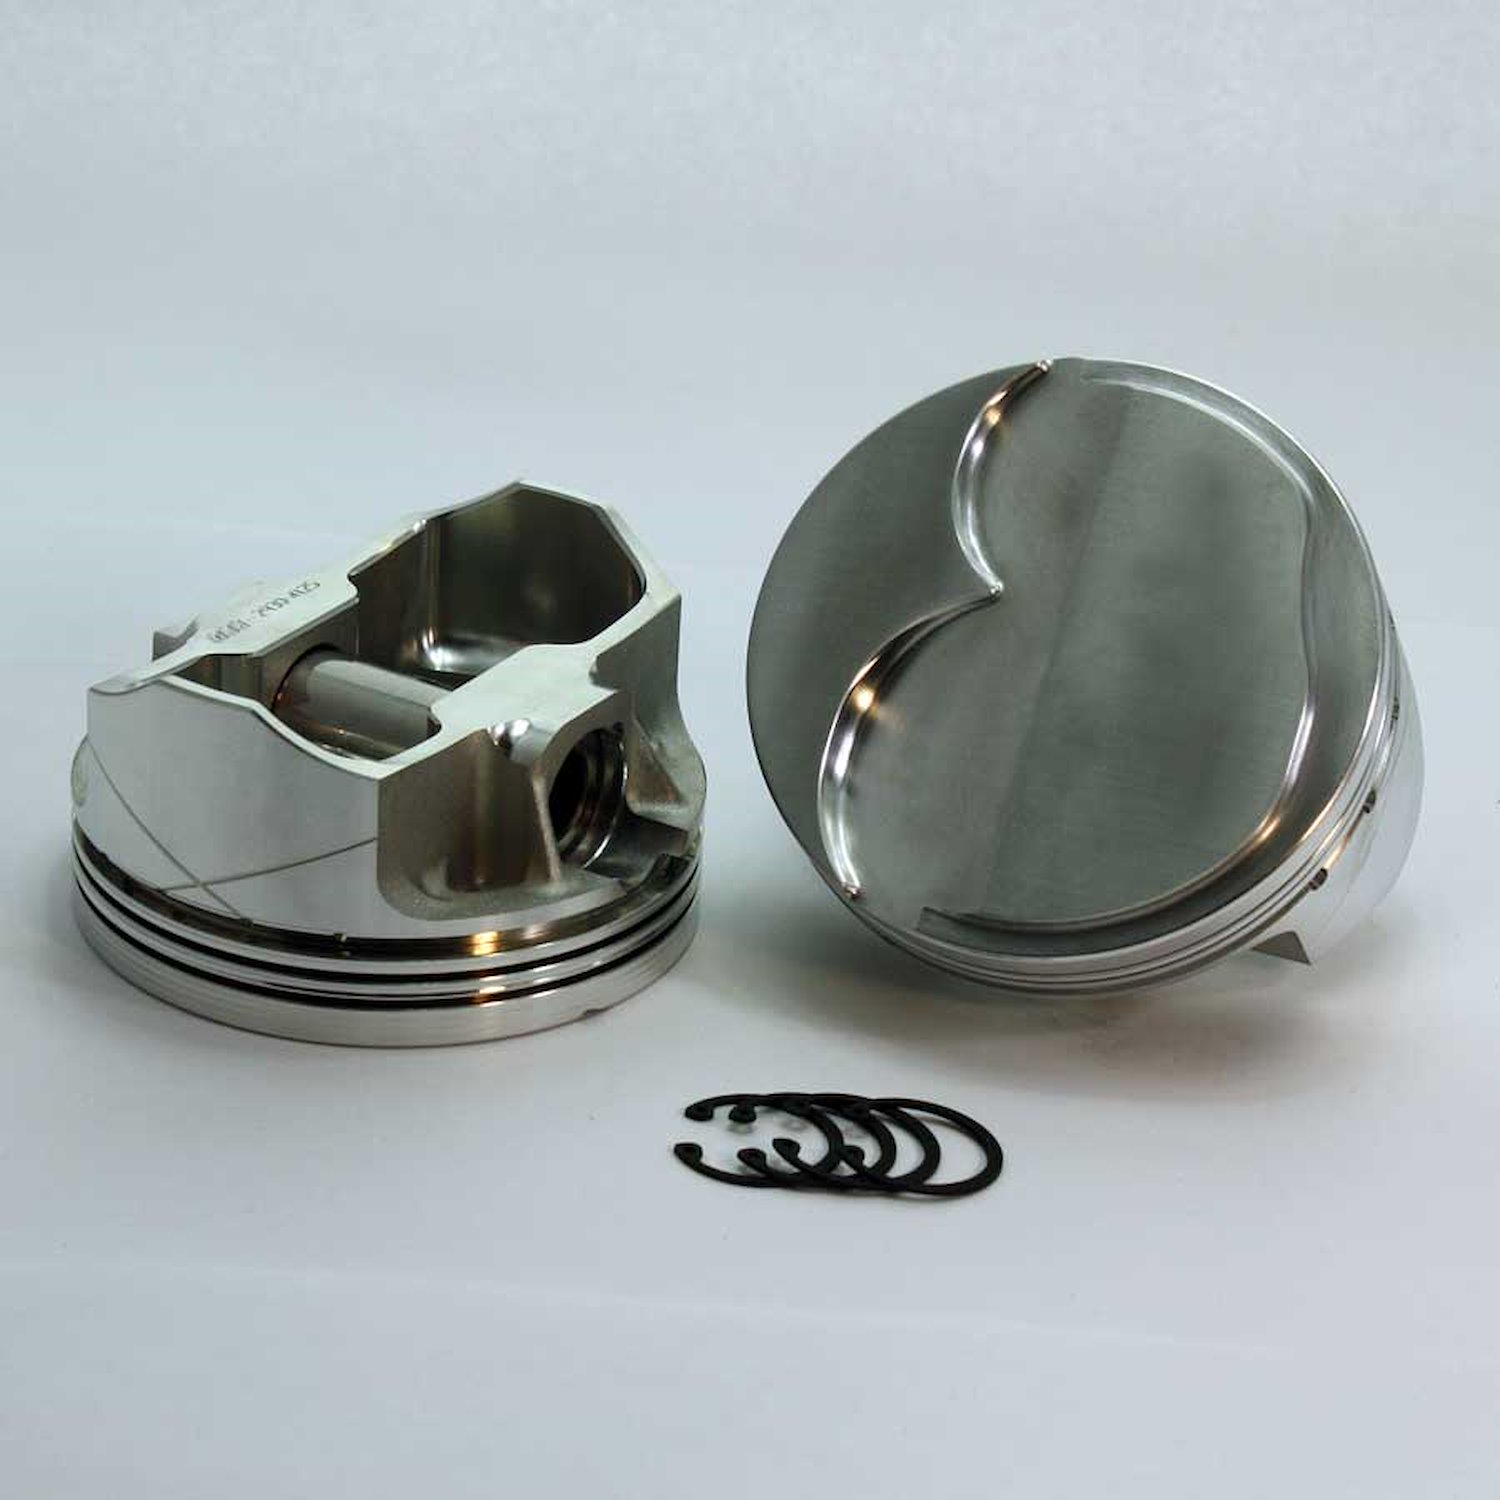 K1-2932-4165 FX-Series Dome Top Piston Set for 1999-2019 Chevy LS, 4.165 in. Bore, +6cc Volume [OEM\Stroker]